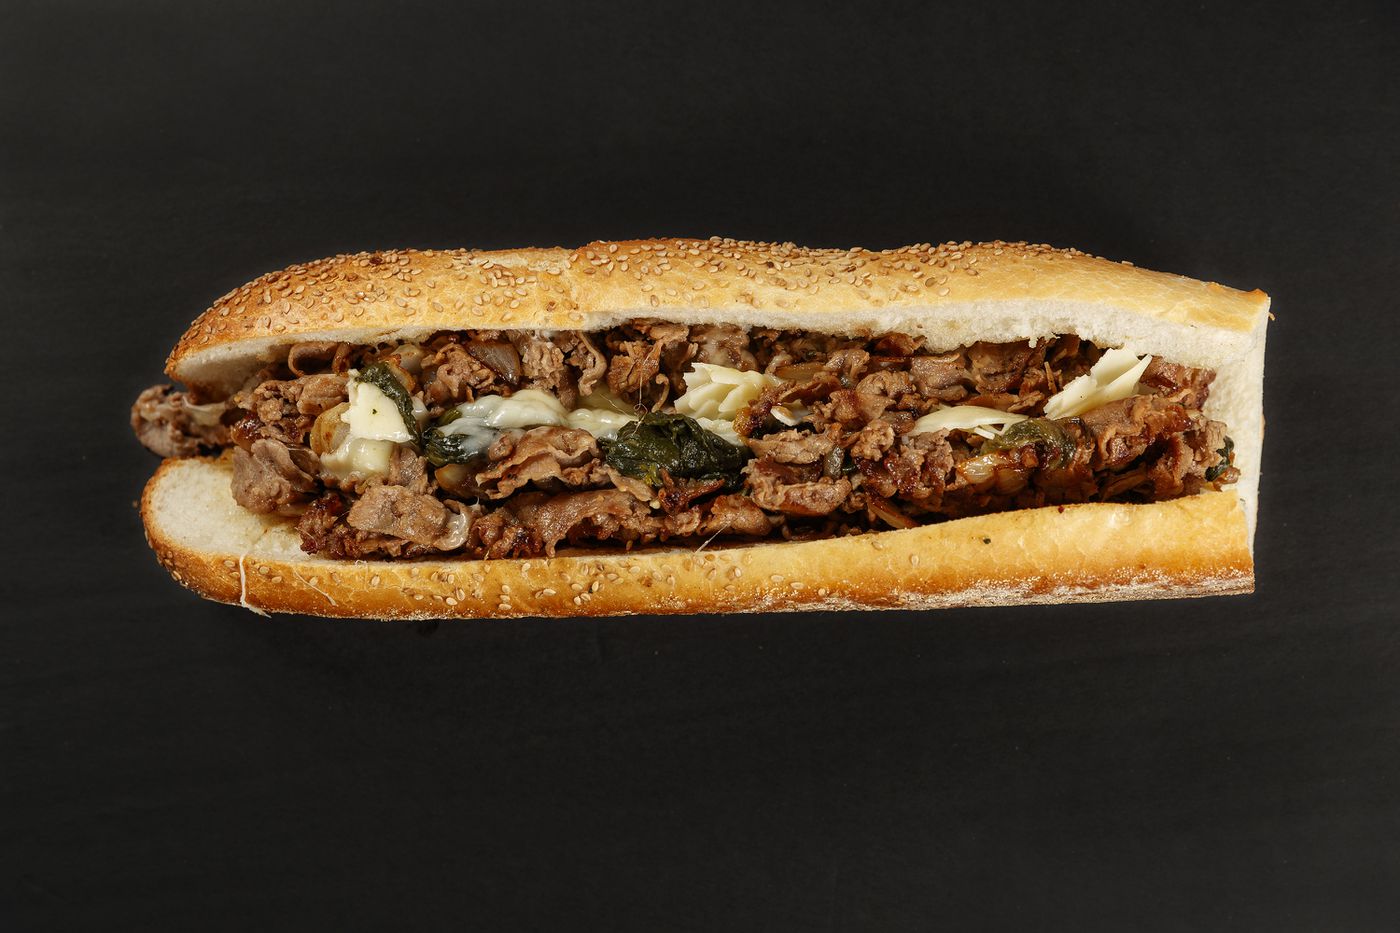 Regular cheesesteak with greens and provolone from John's Roast Pork.